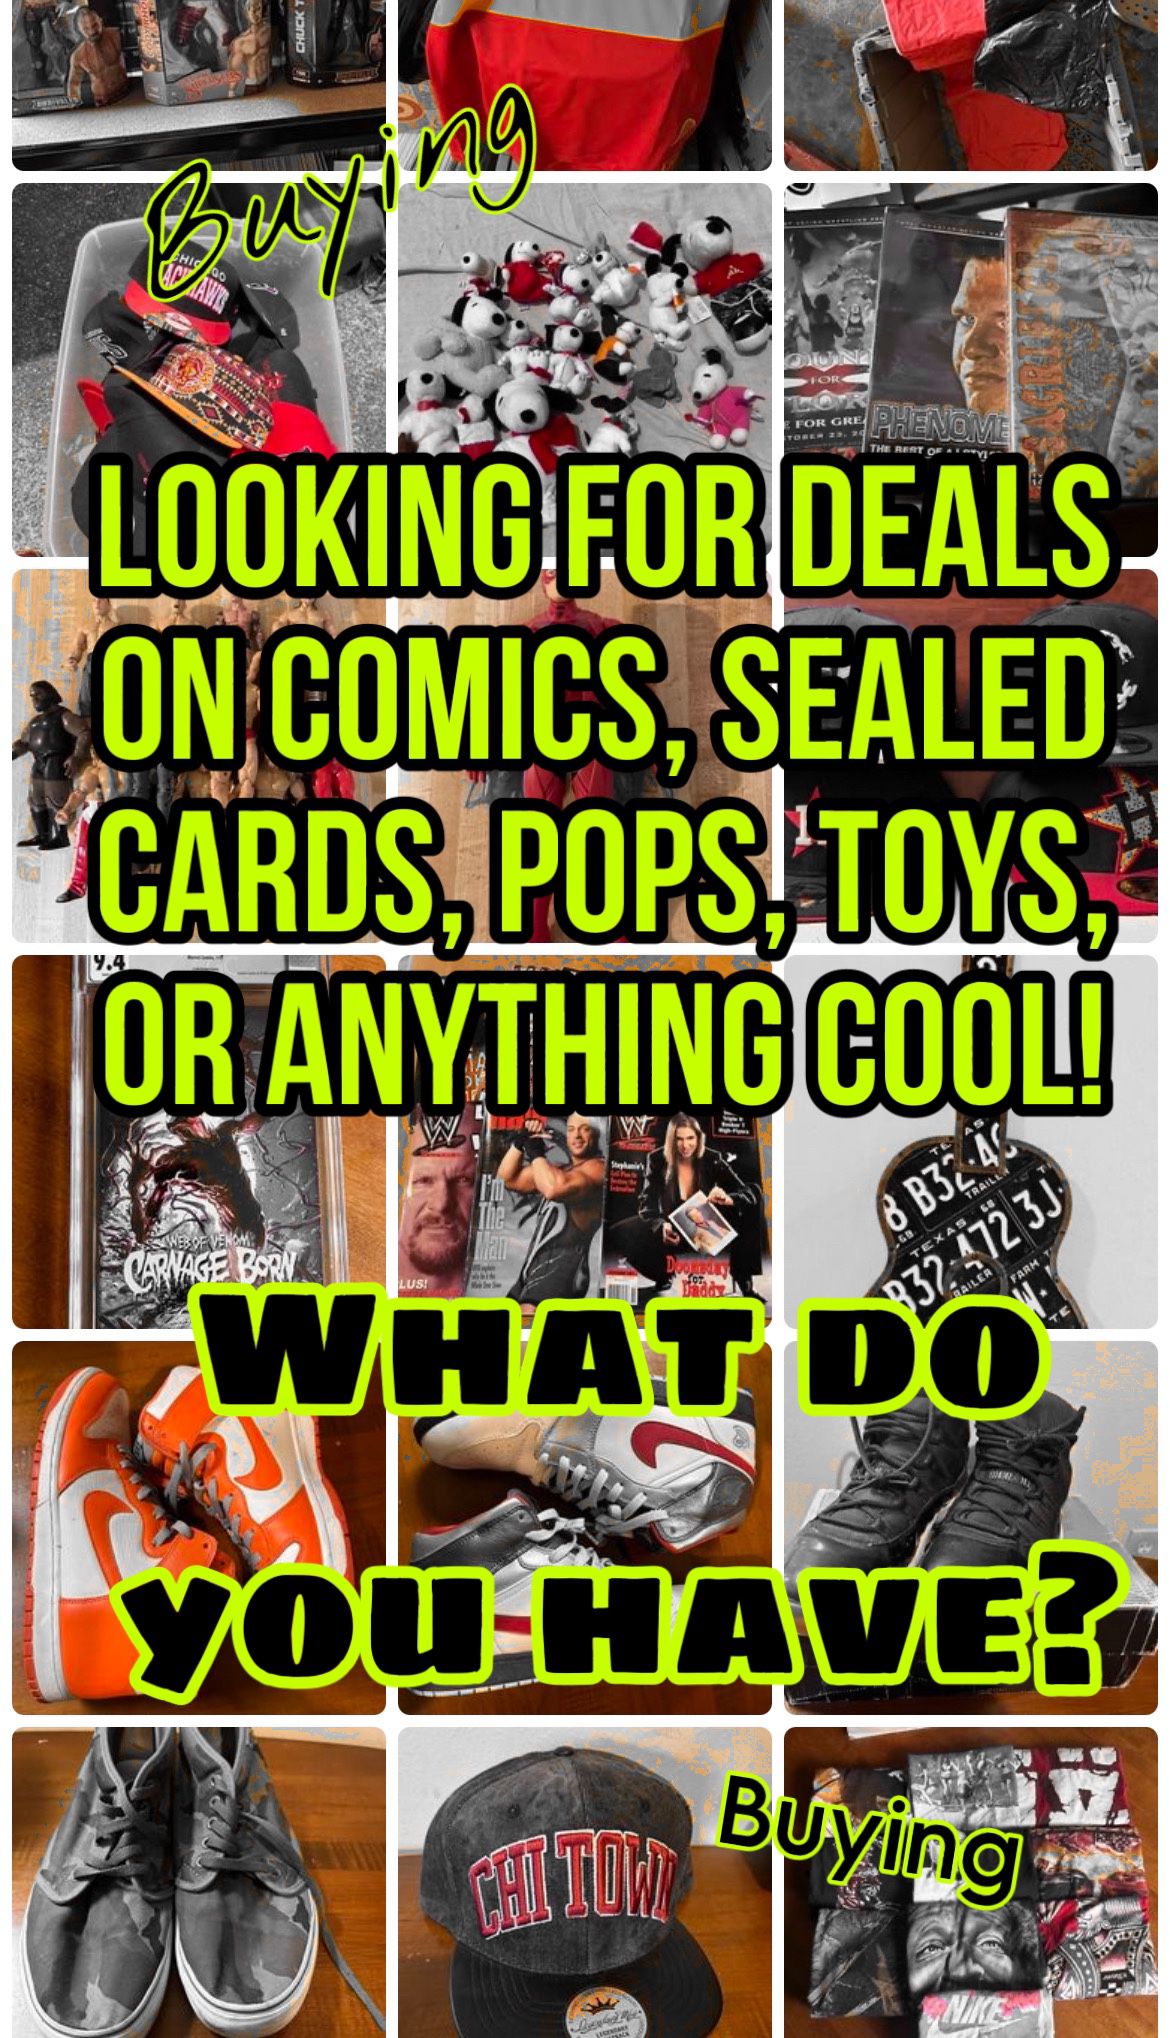 Have Comics, Cards, Funko Pops, Action Figures Or Cool Stuff For Sale? 